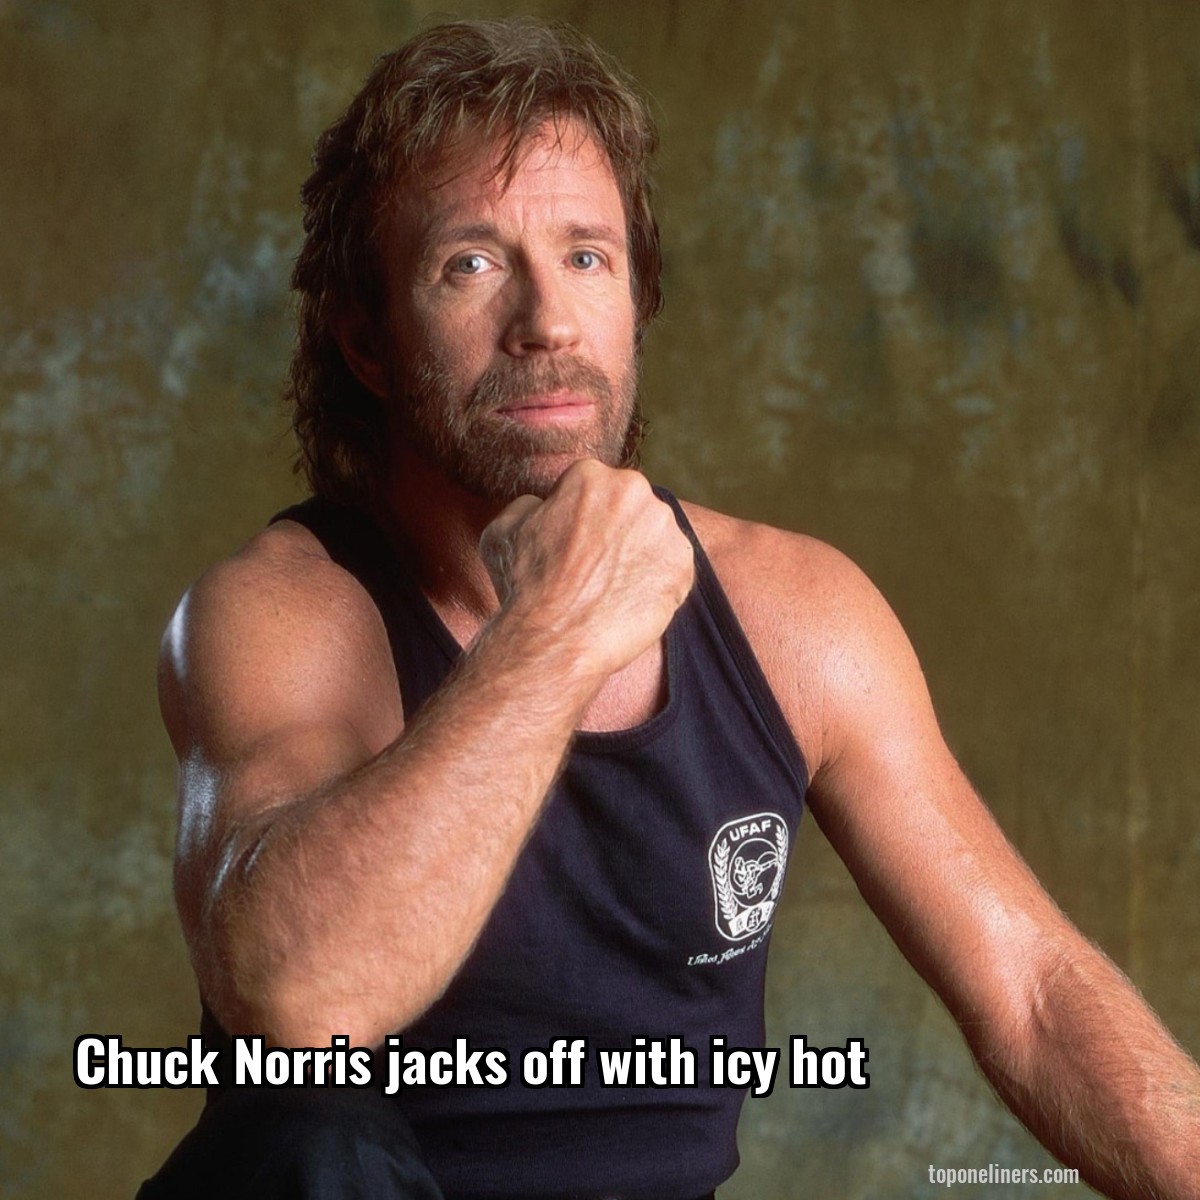 Chuck Norris jacks off with icy hot